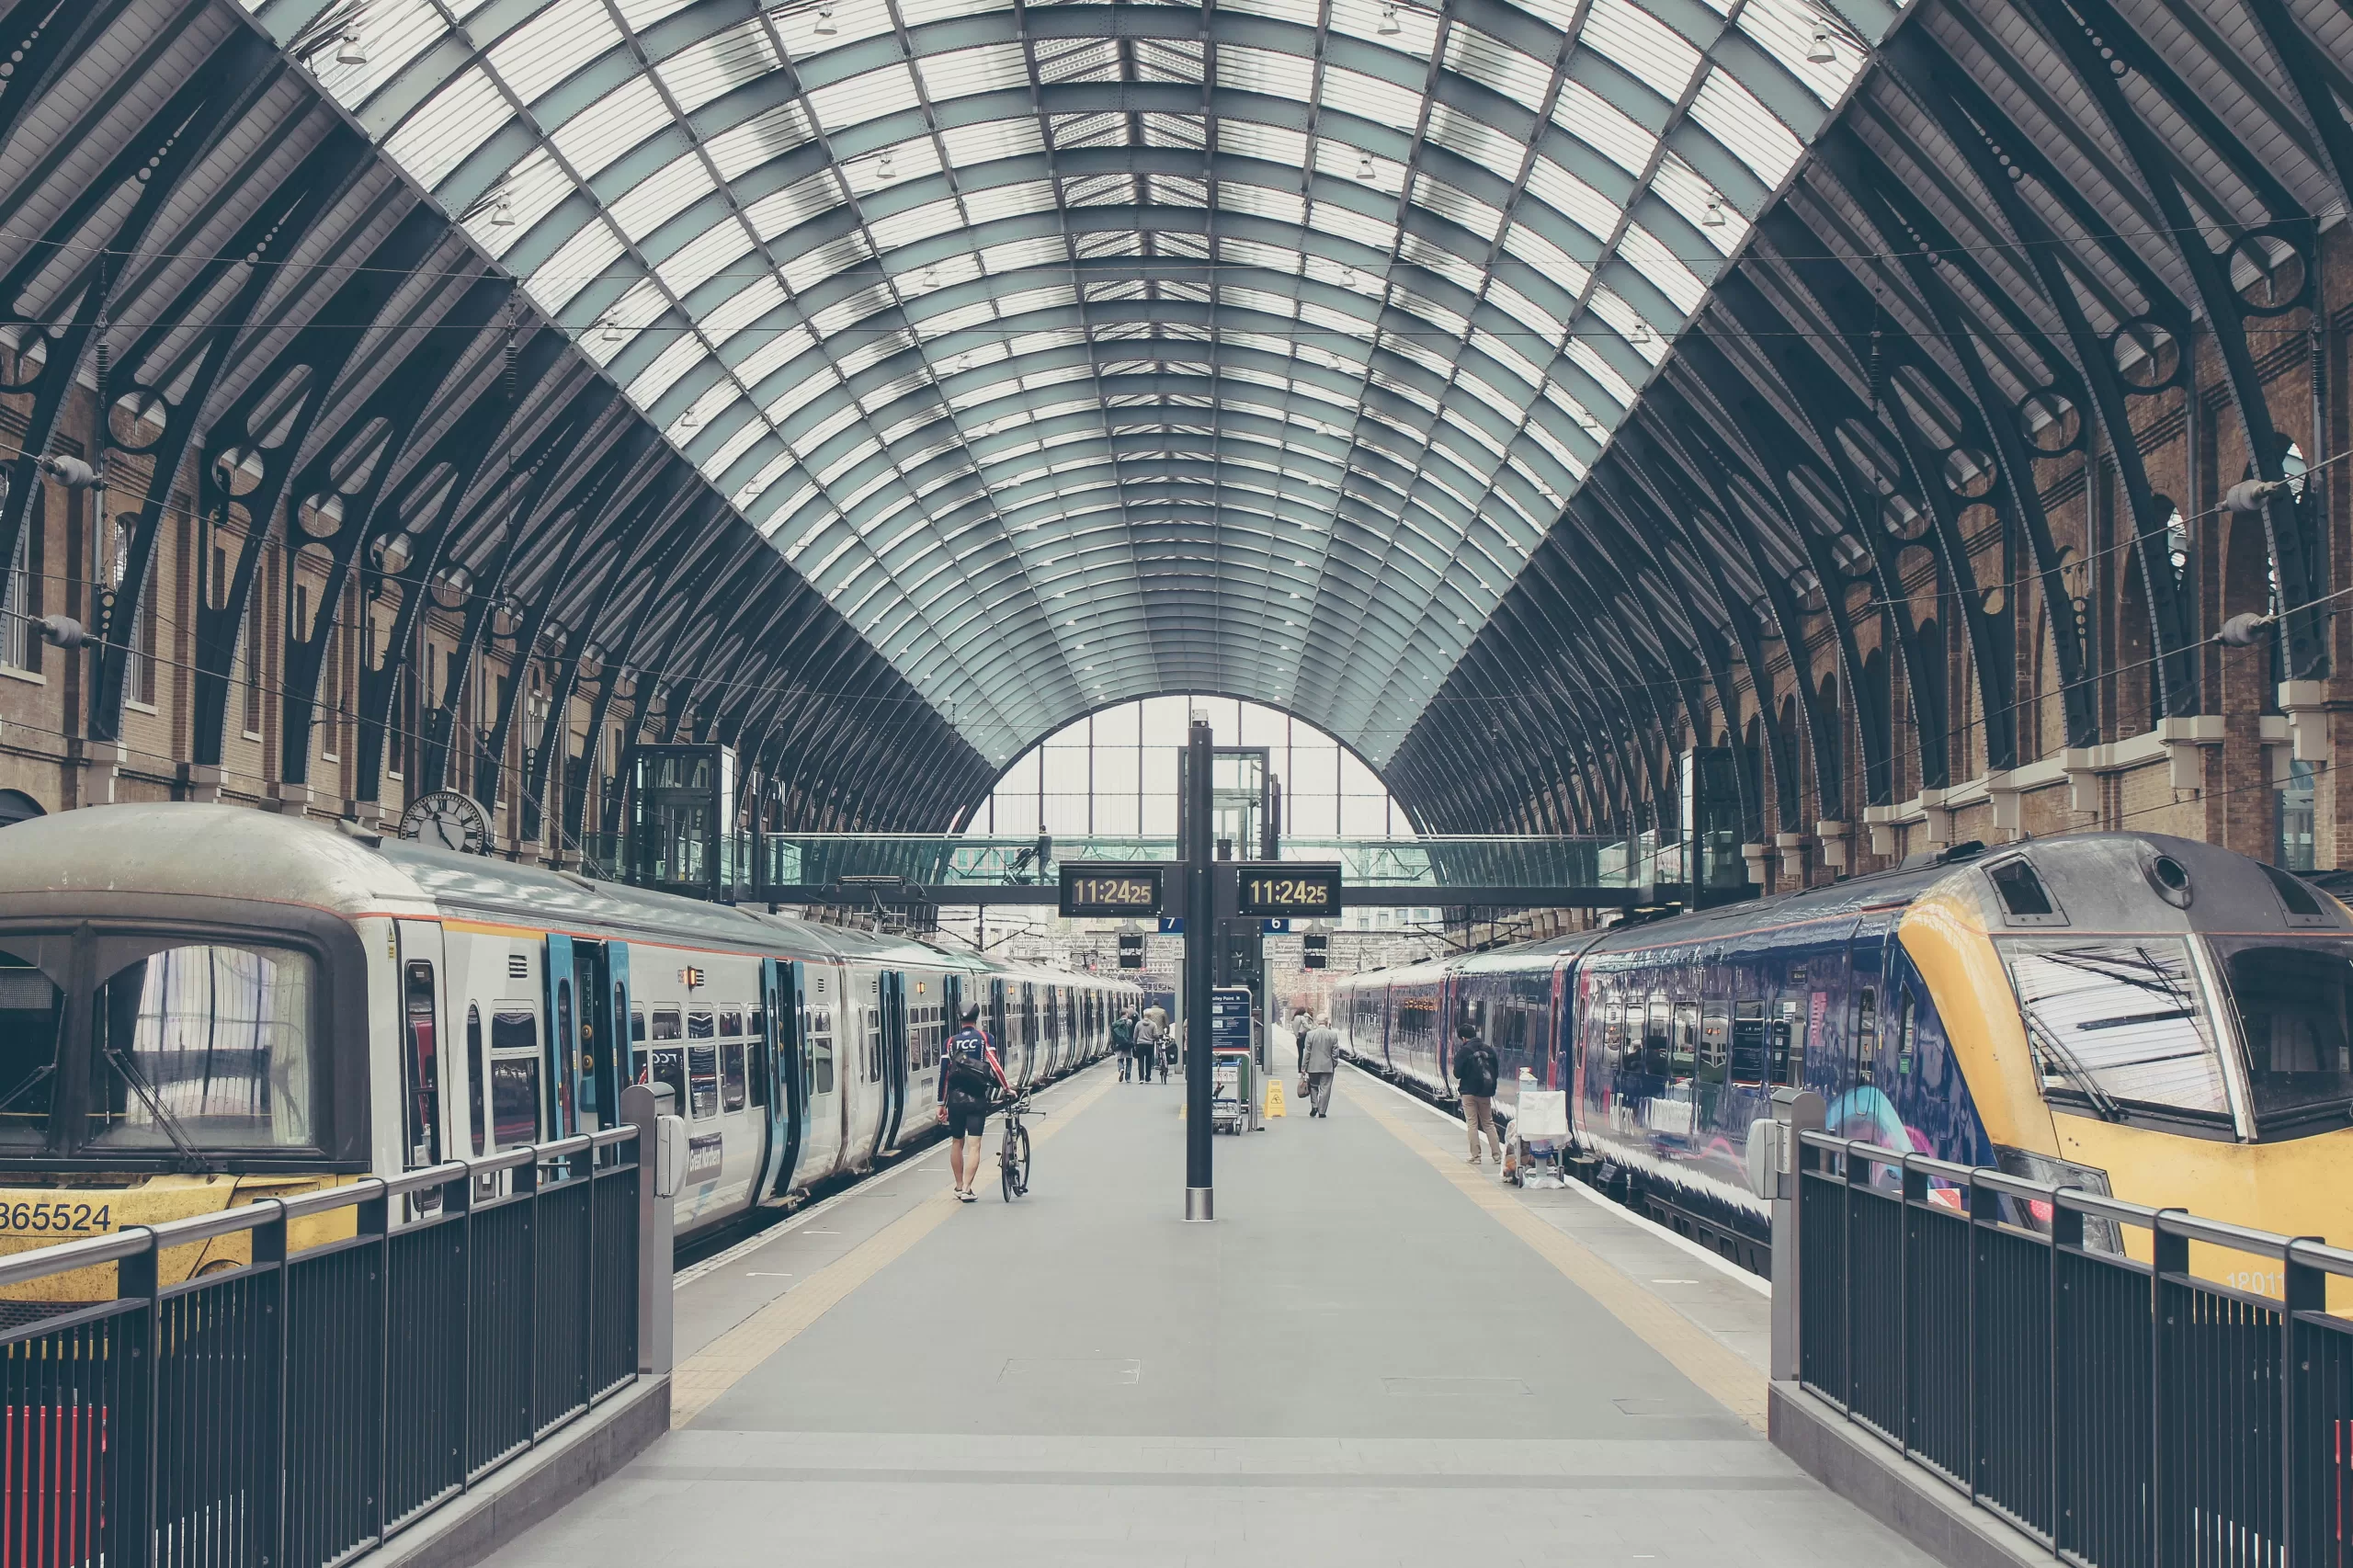 Digital Rail wins Innovate UK funding competition